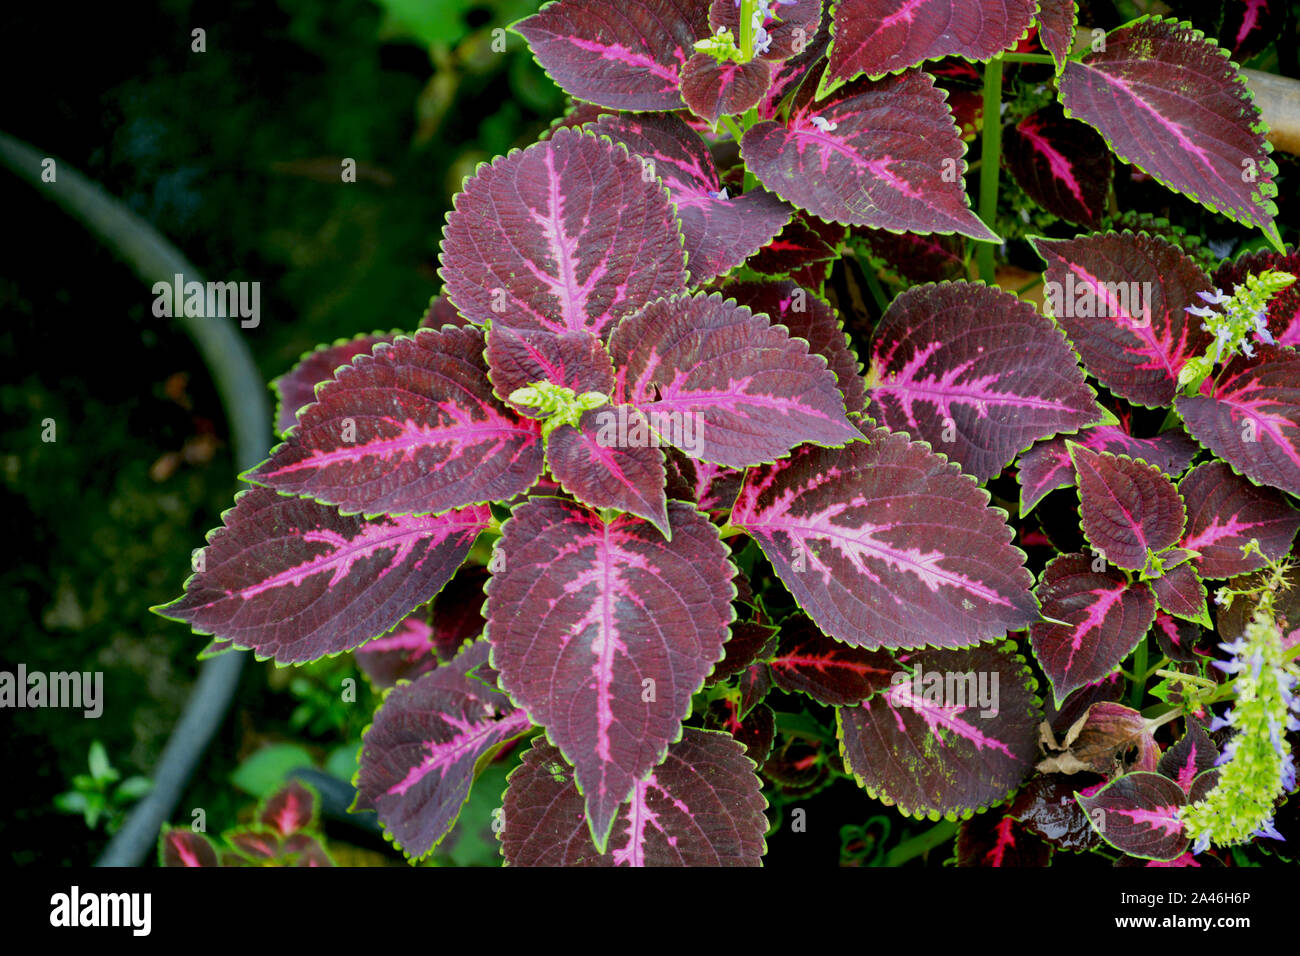 Close up of Coleus ( Plectranthus scutellarioides ) plant leaves growing in mawlynnong village of Shillong, Meghalaya, India Stock Photo